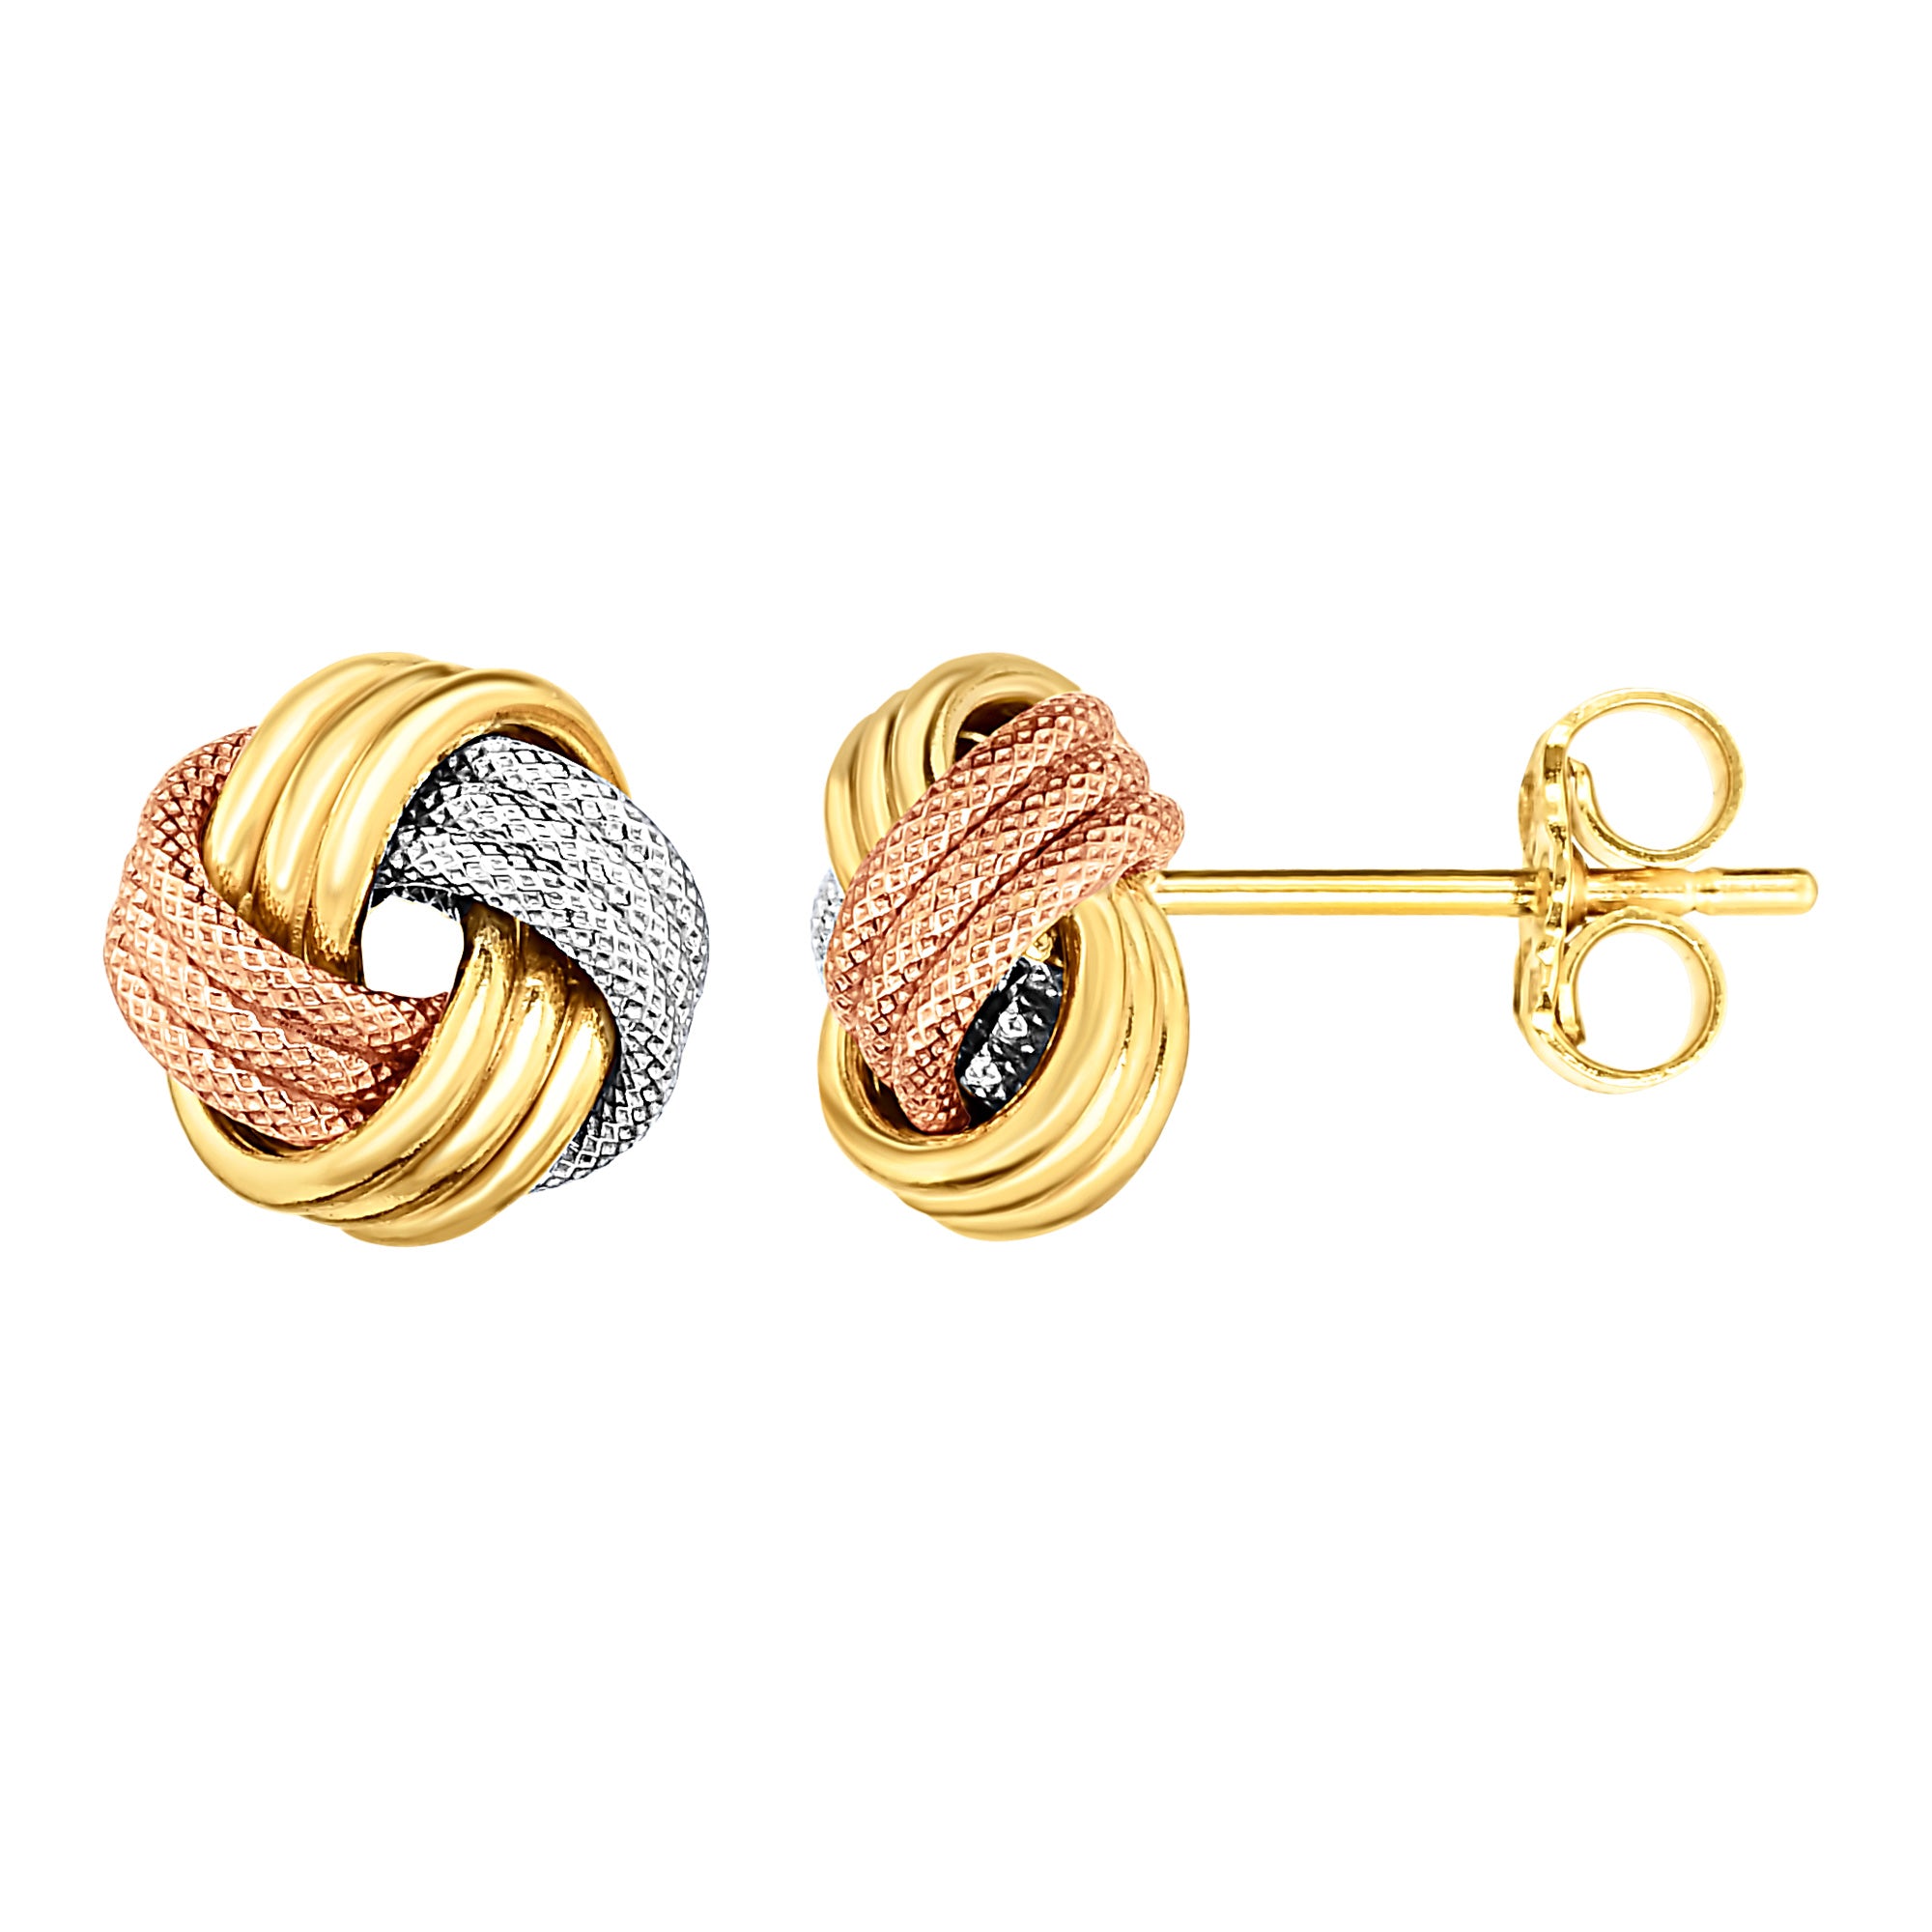 14K Tricolor Shiny And Textured Finish Love Knot Earrings, 9mm fine designer jewelry for men and women